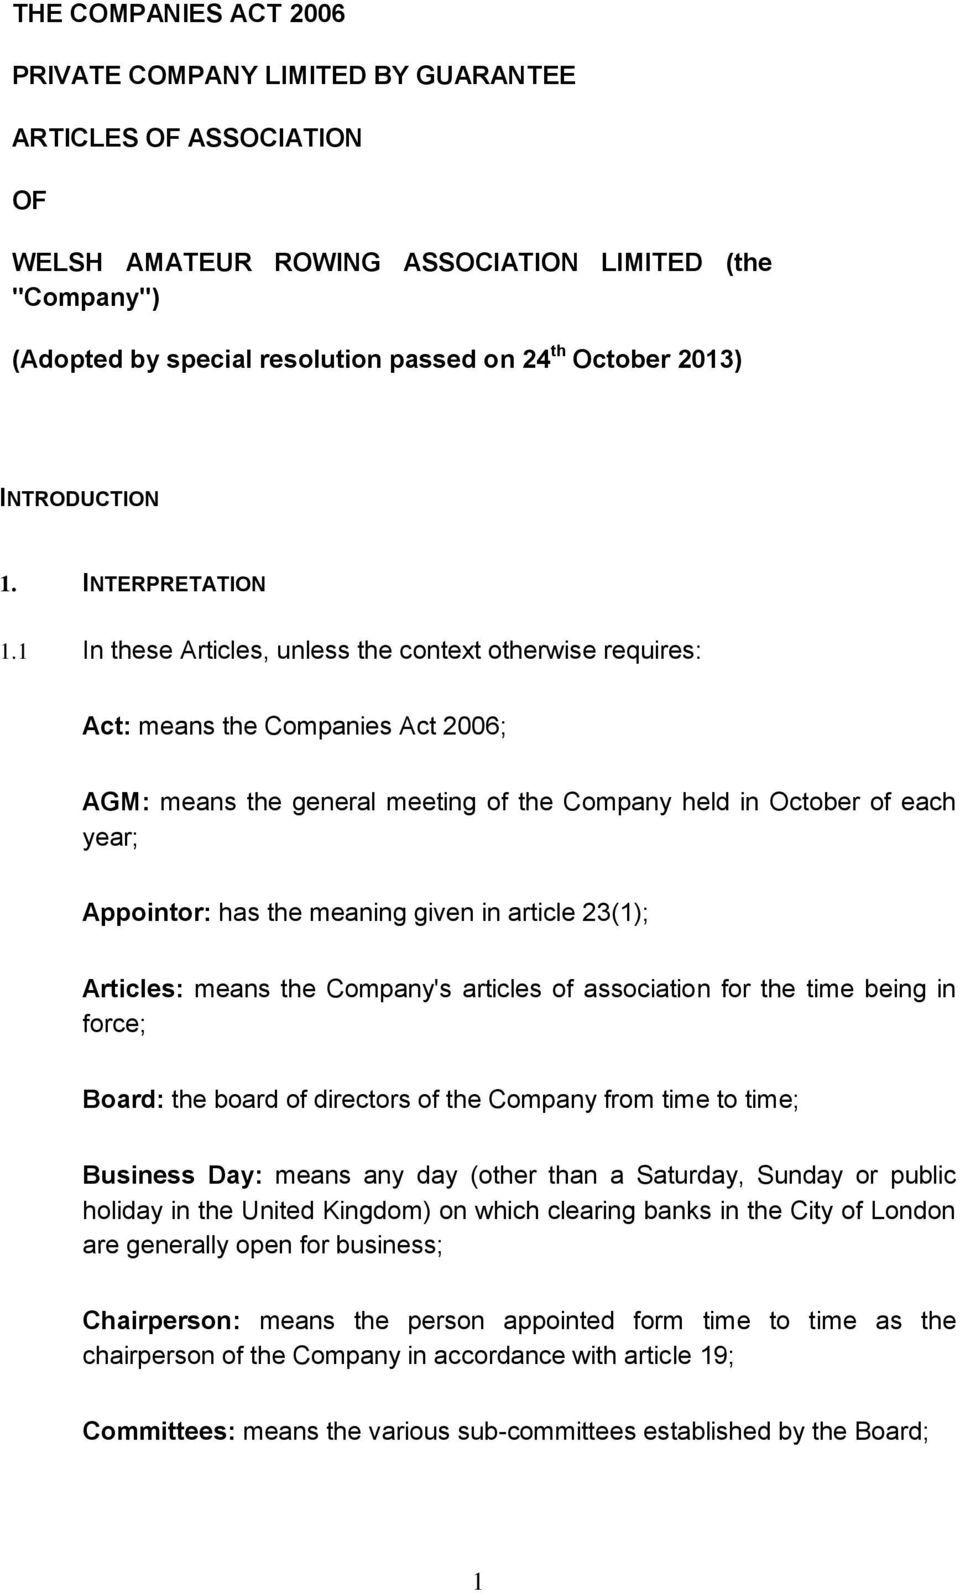 1 In these Articles, unless the context otherwise requires: Act: means the Companies Act 2006; AGM: means the general meeting of the Company held in October of each year; Appointor: has the meaning